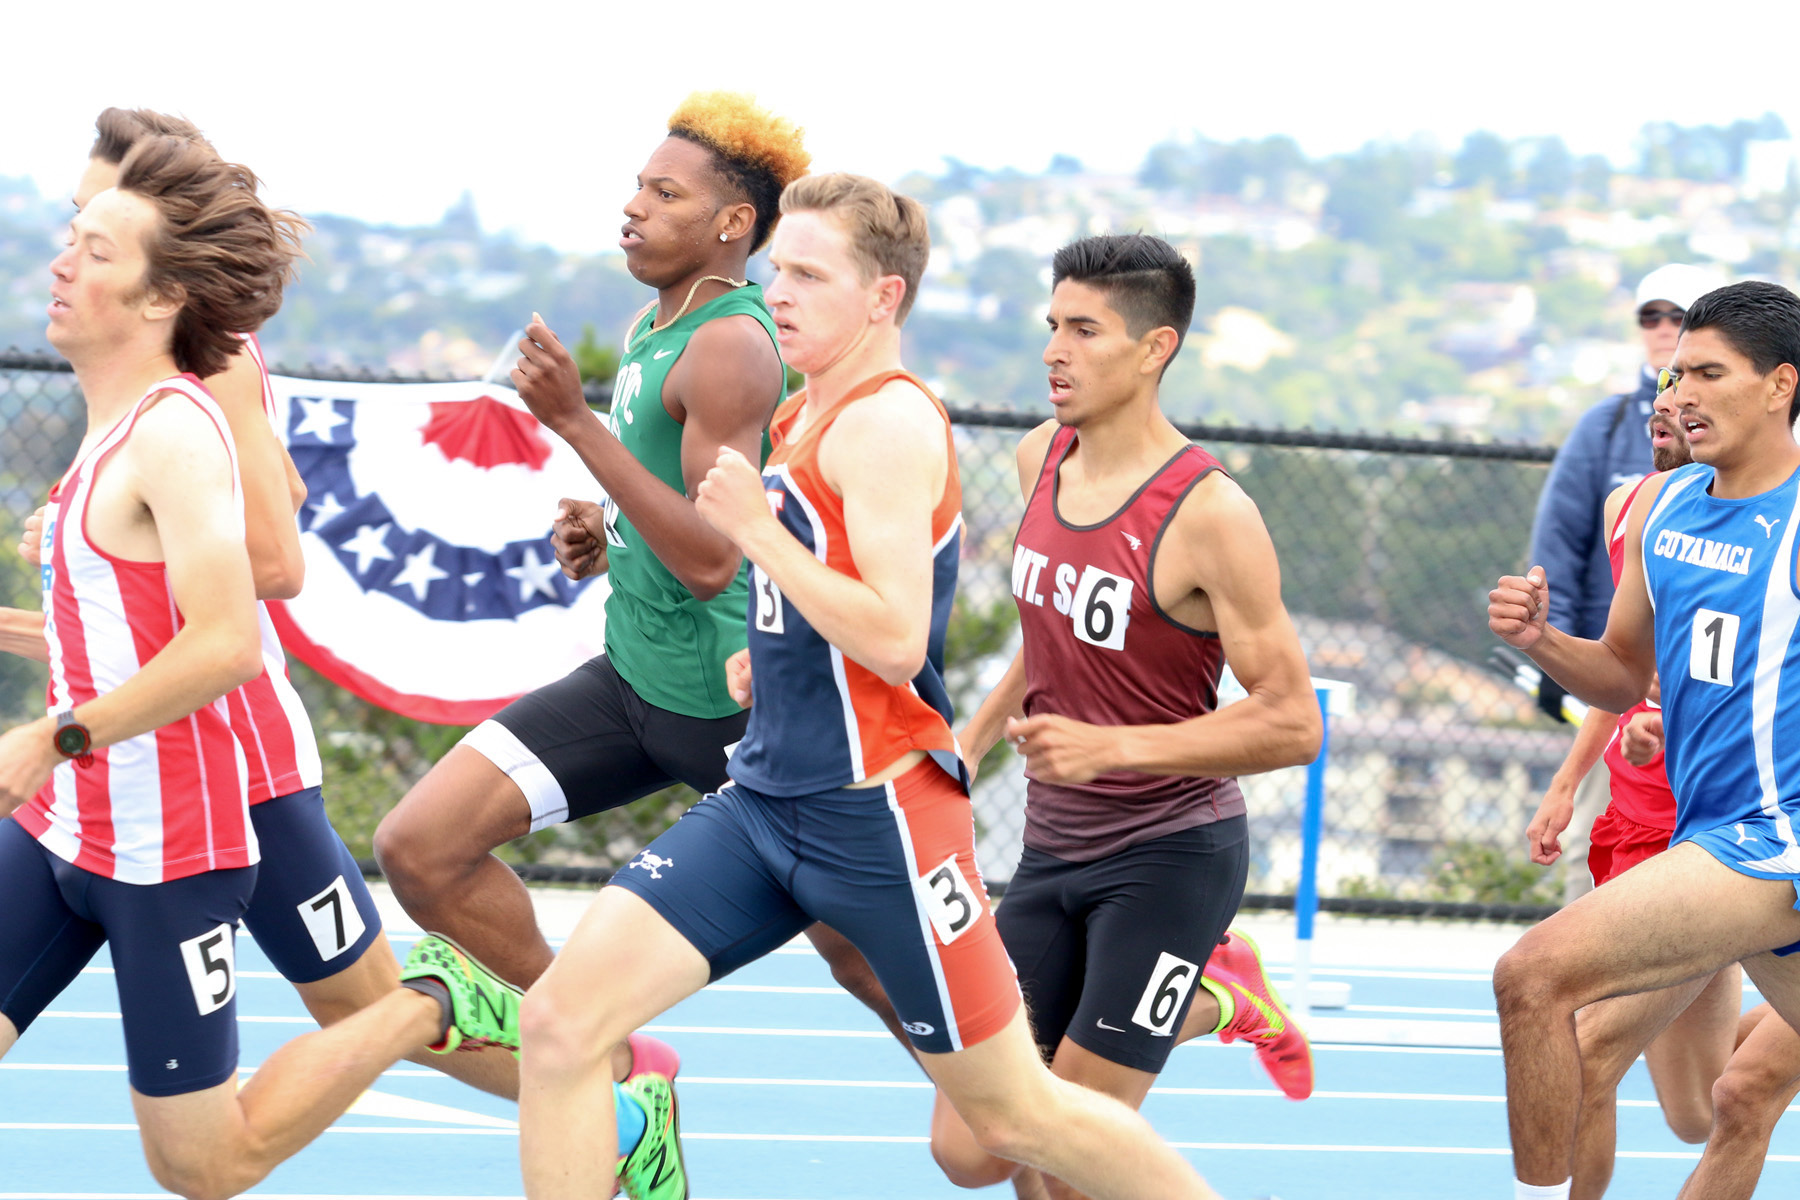 Smythe wins SoCal Regionals in 800 for the Pirates